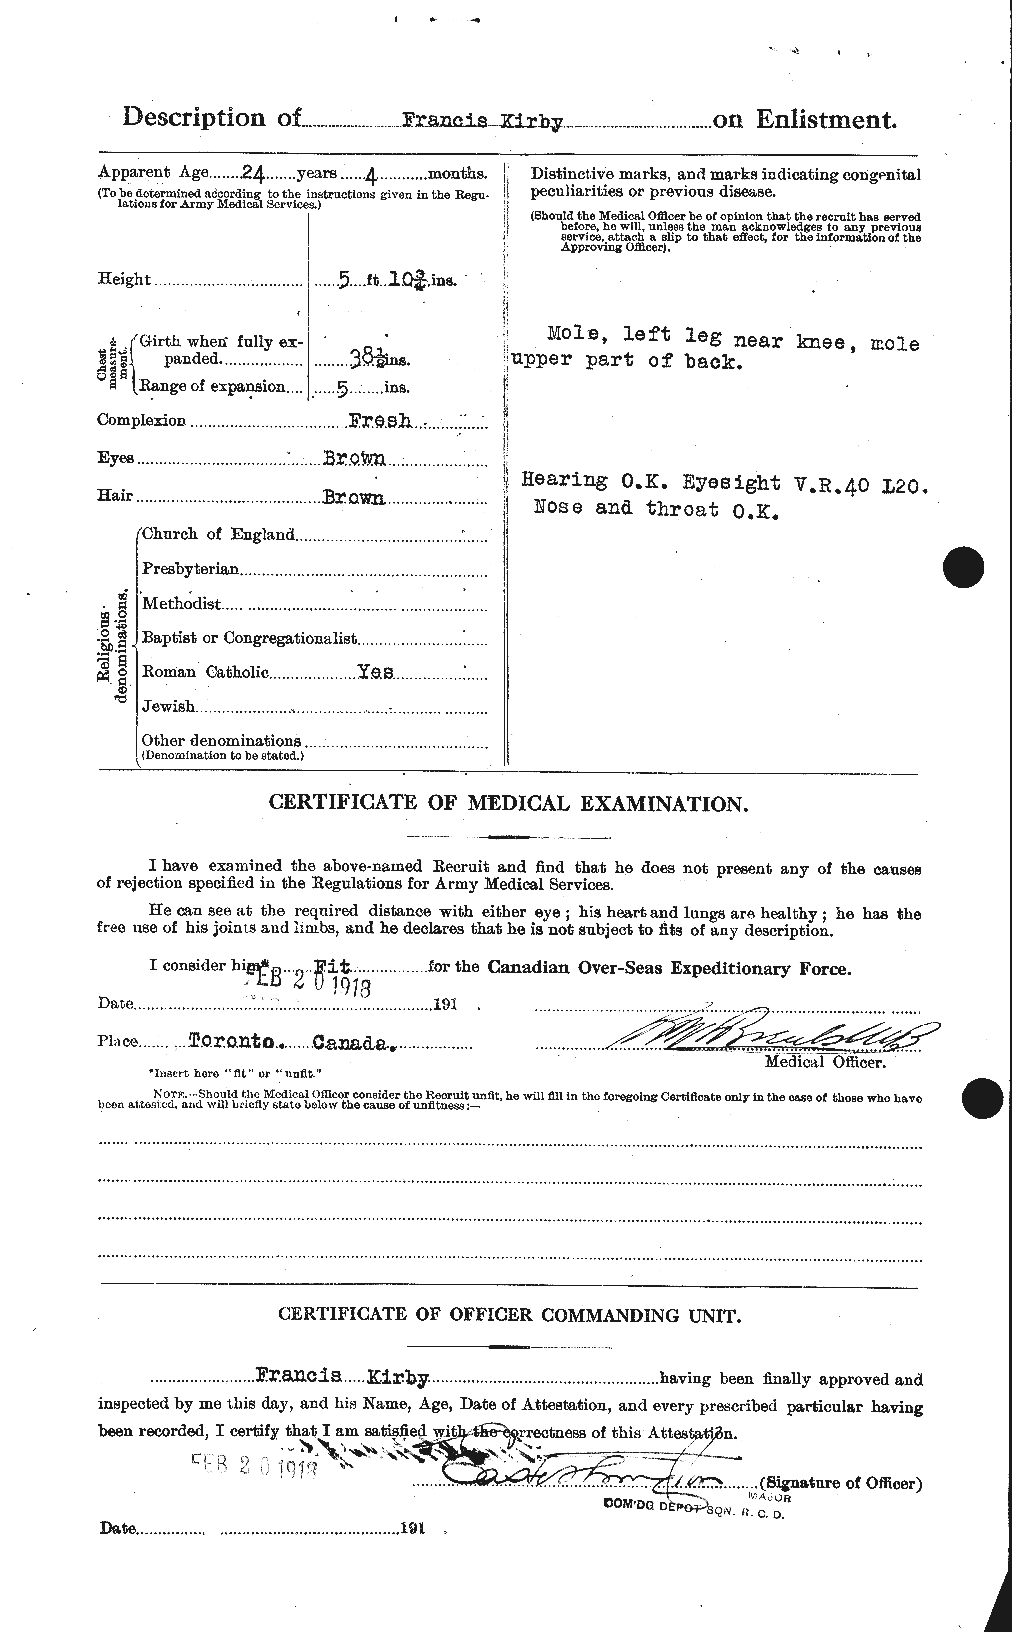 Personnel Records of the First World War - CEF 437184b